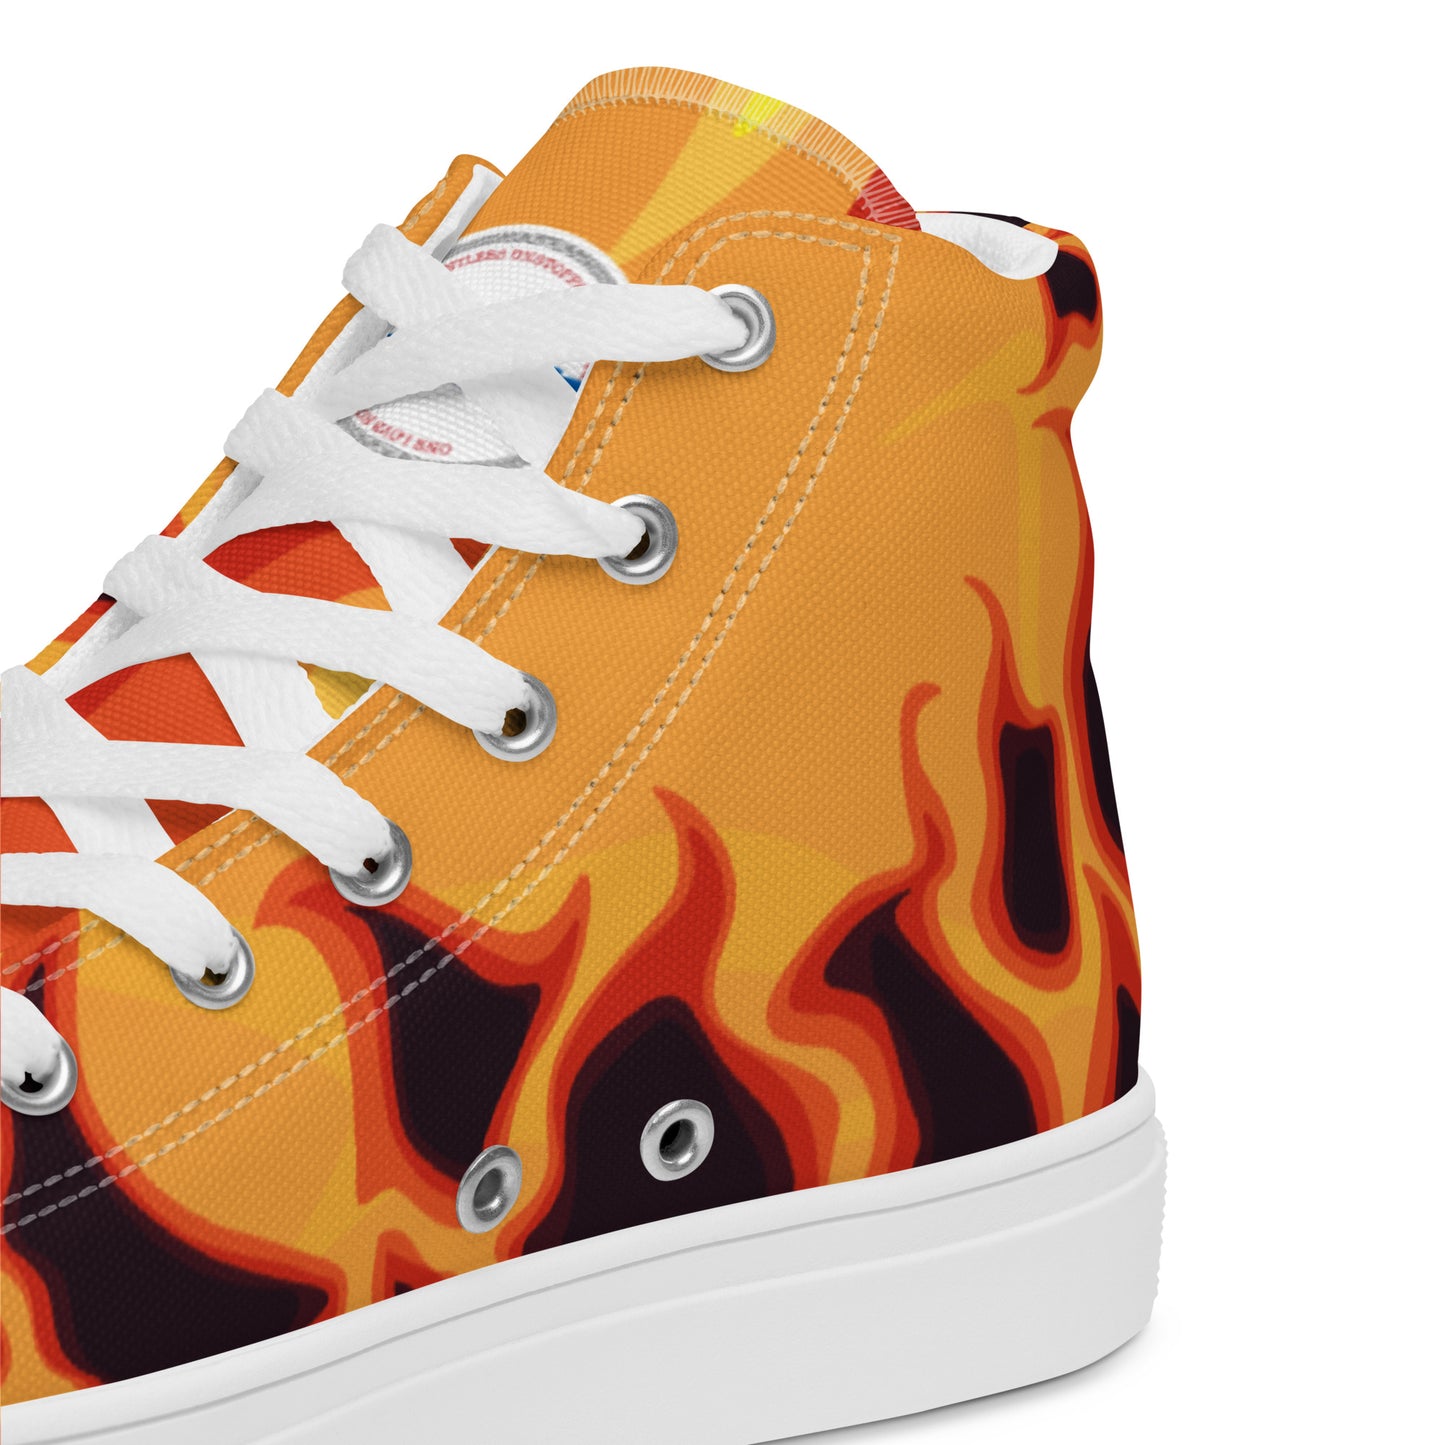 HOT LAVA by DOLVING - Women’s high top canvas shoes